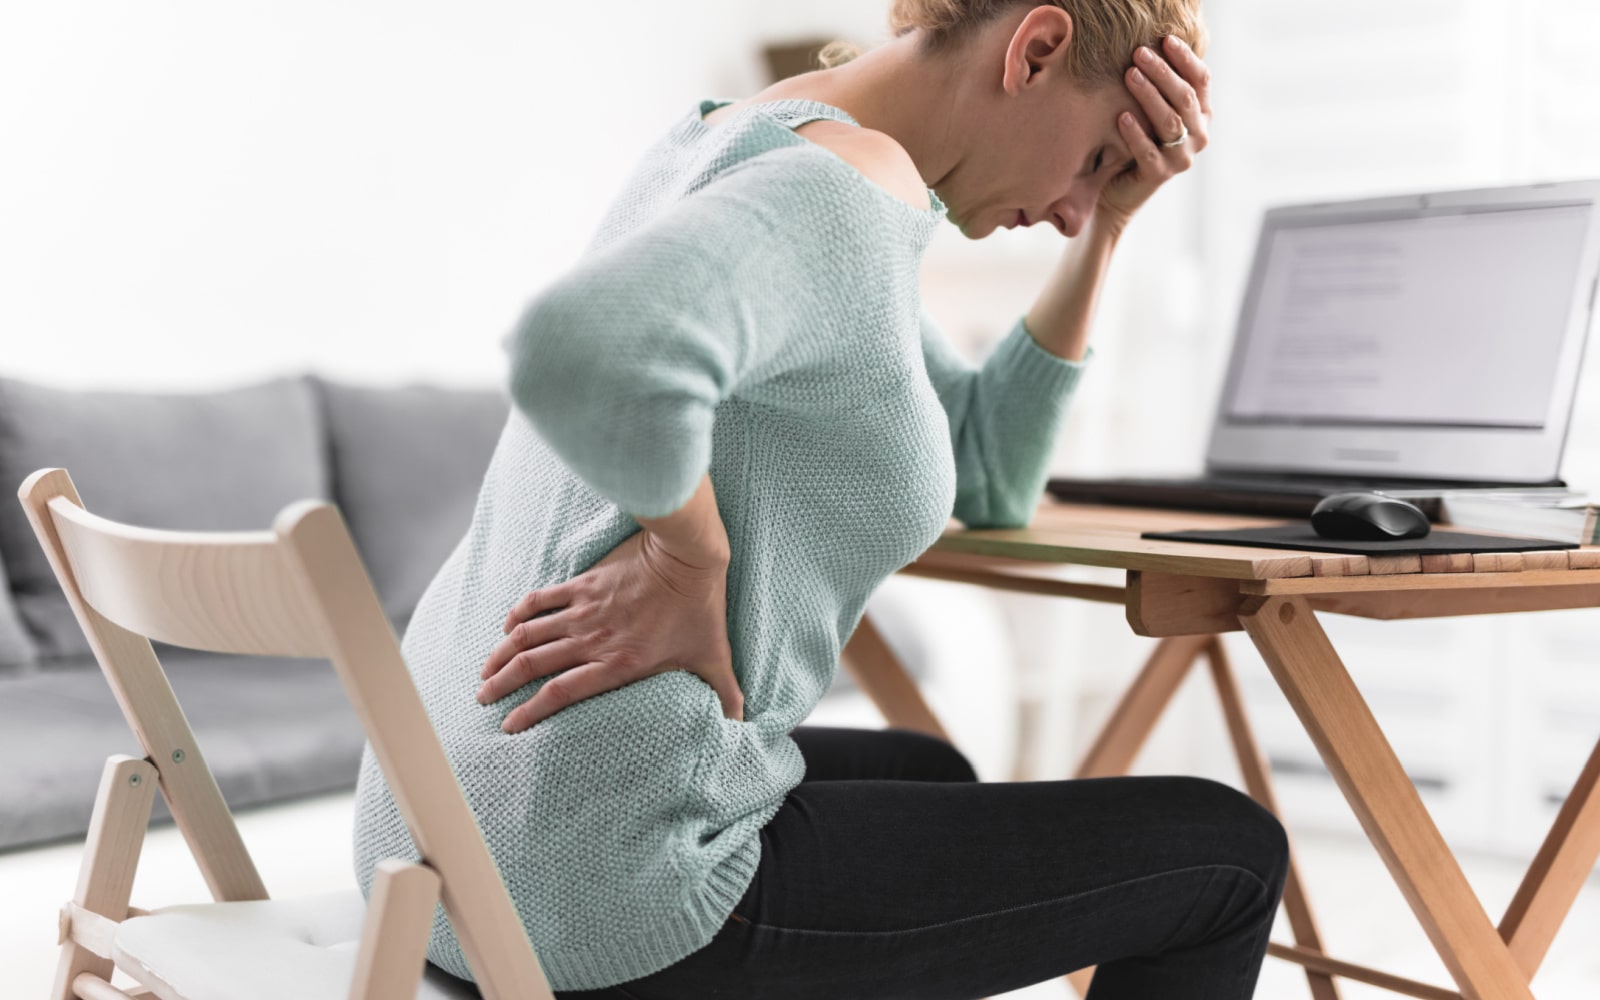 Woman Experiencing Hip Pain at Desk